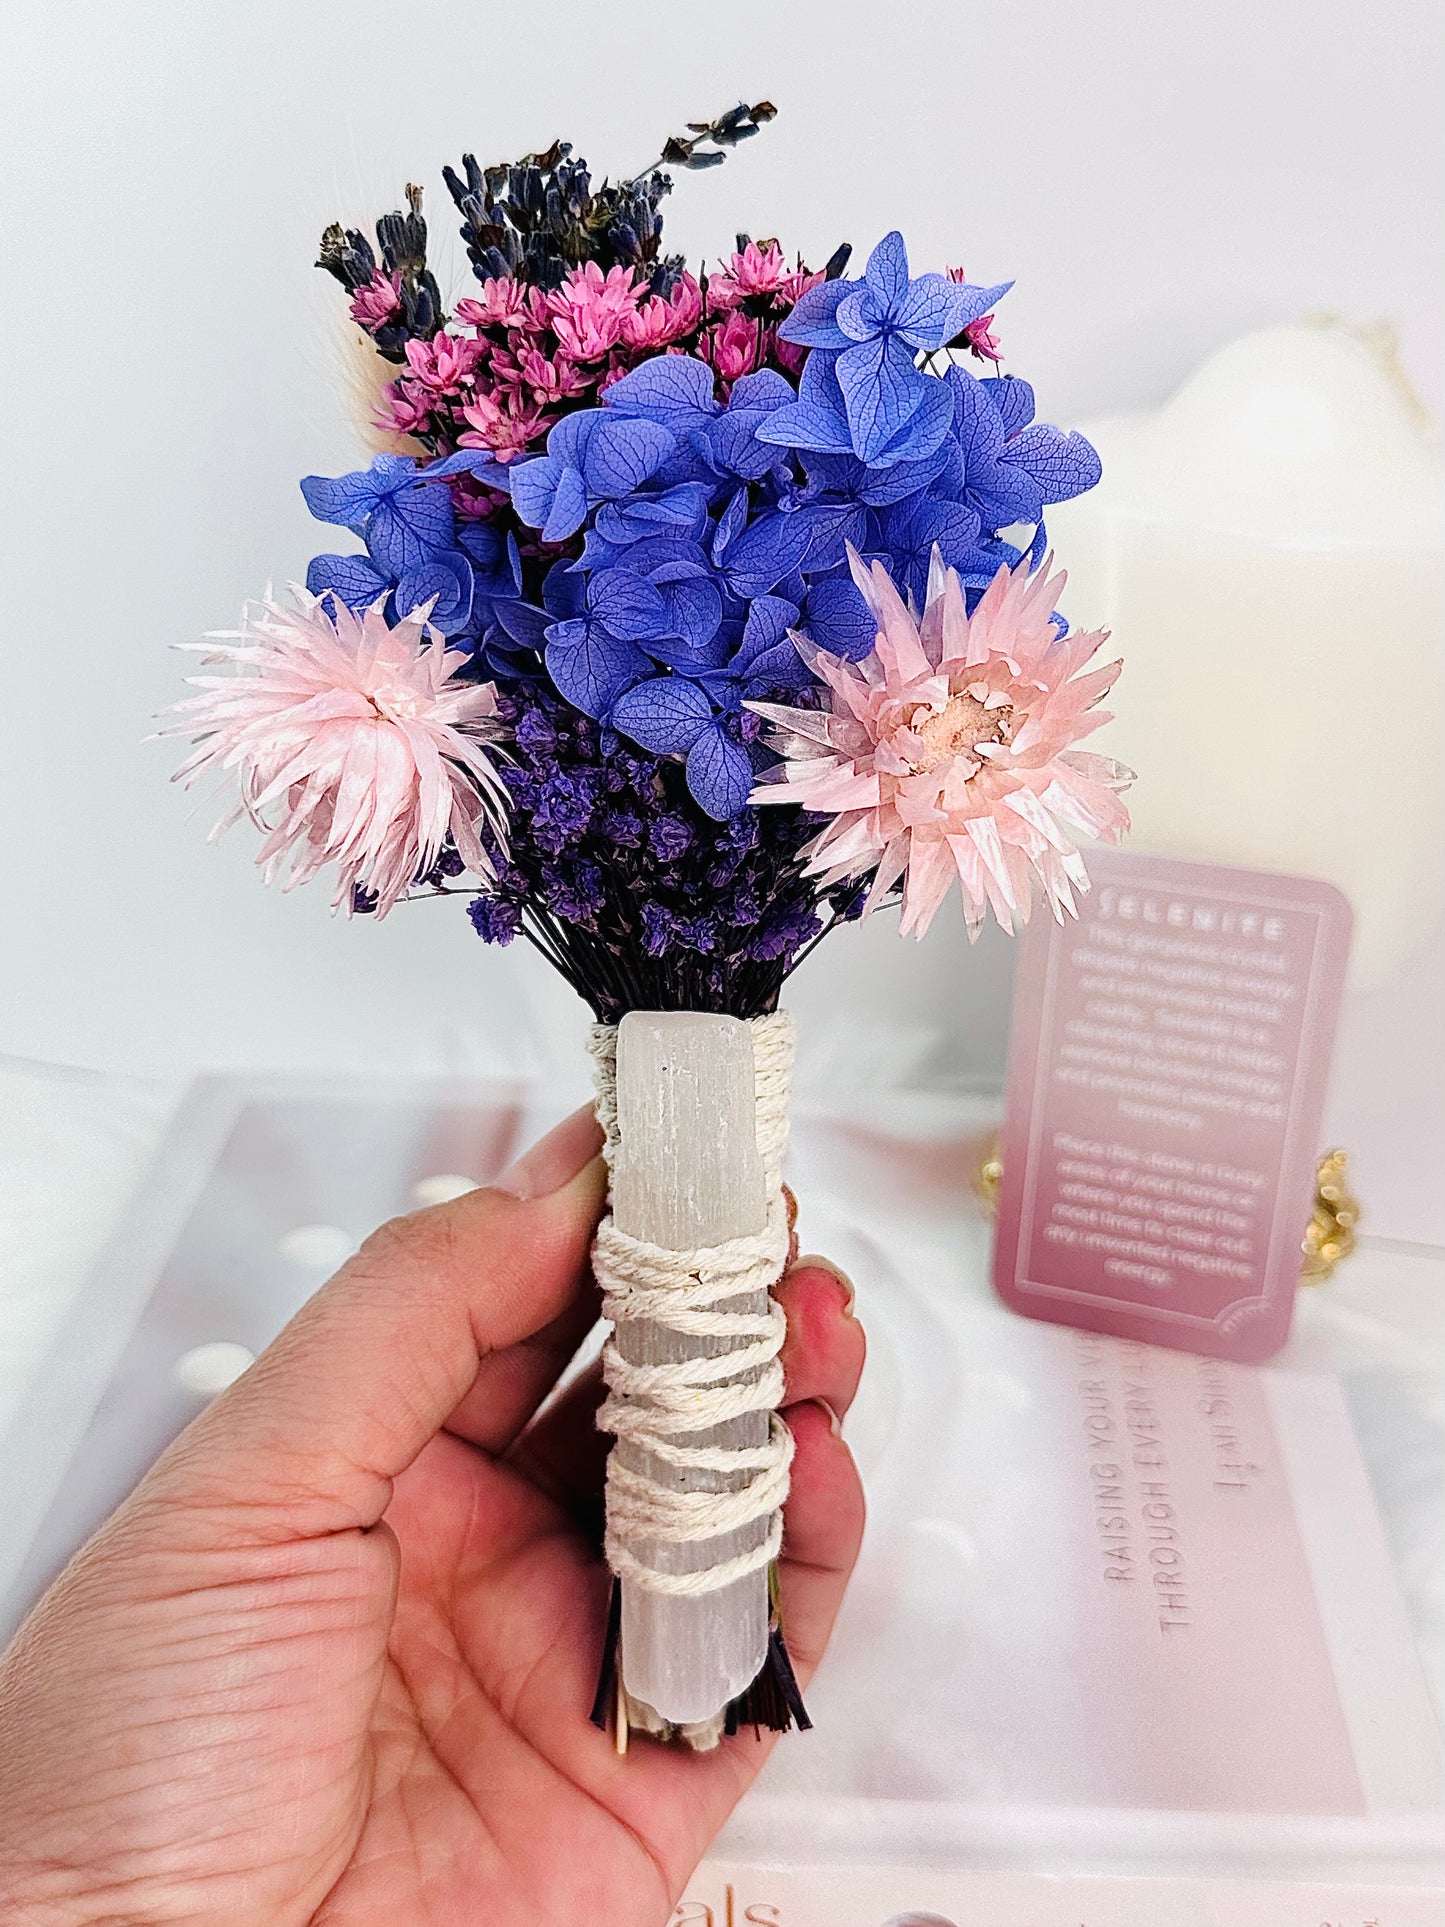 ‘Cleansing Flower Wand’ ~ Gorgeous Handmade Flower Wand Approx 18cm - 20cm To Cleanse Your Home or Office Space